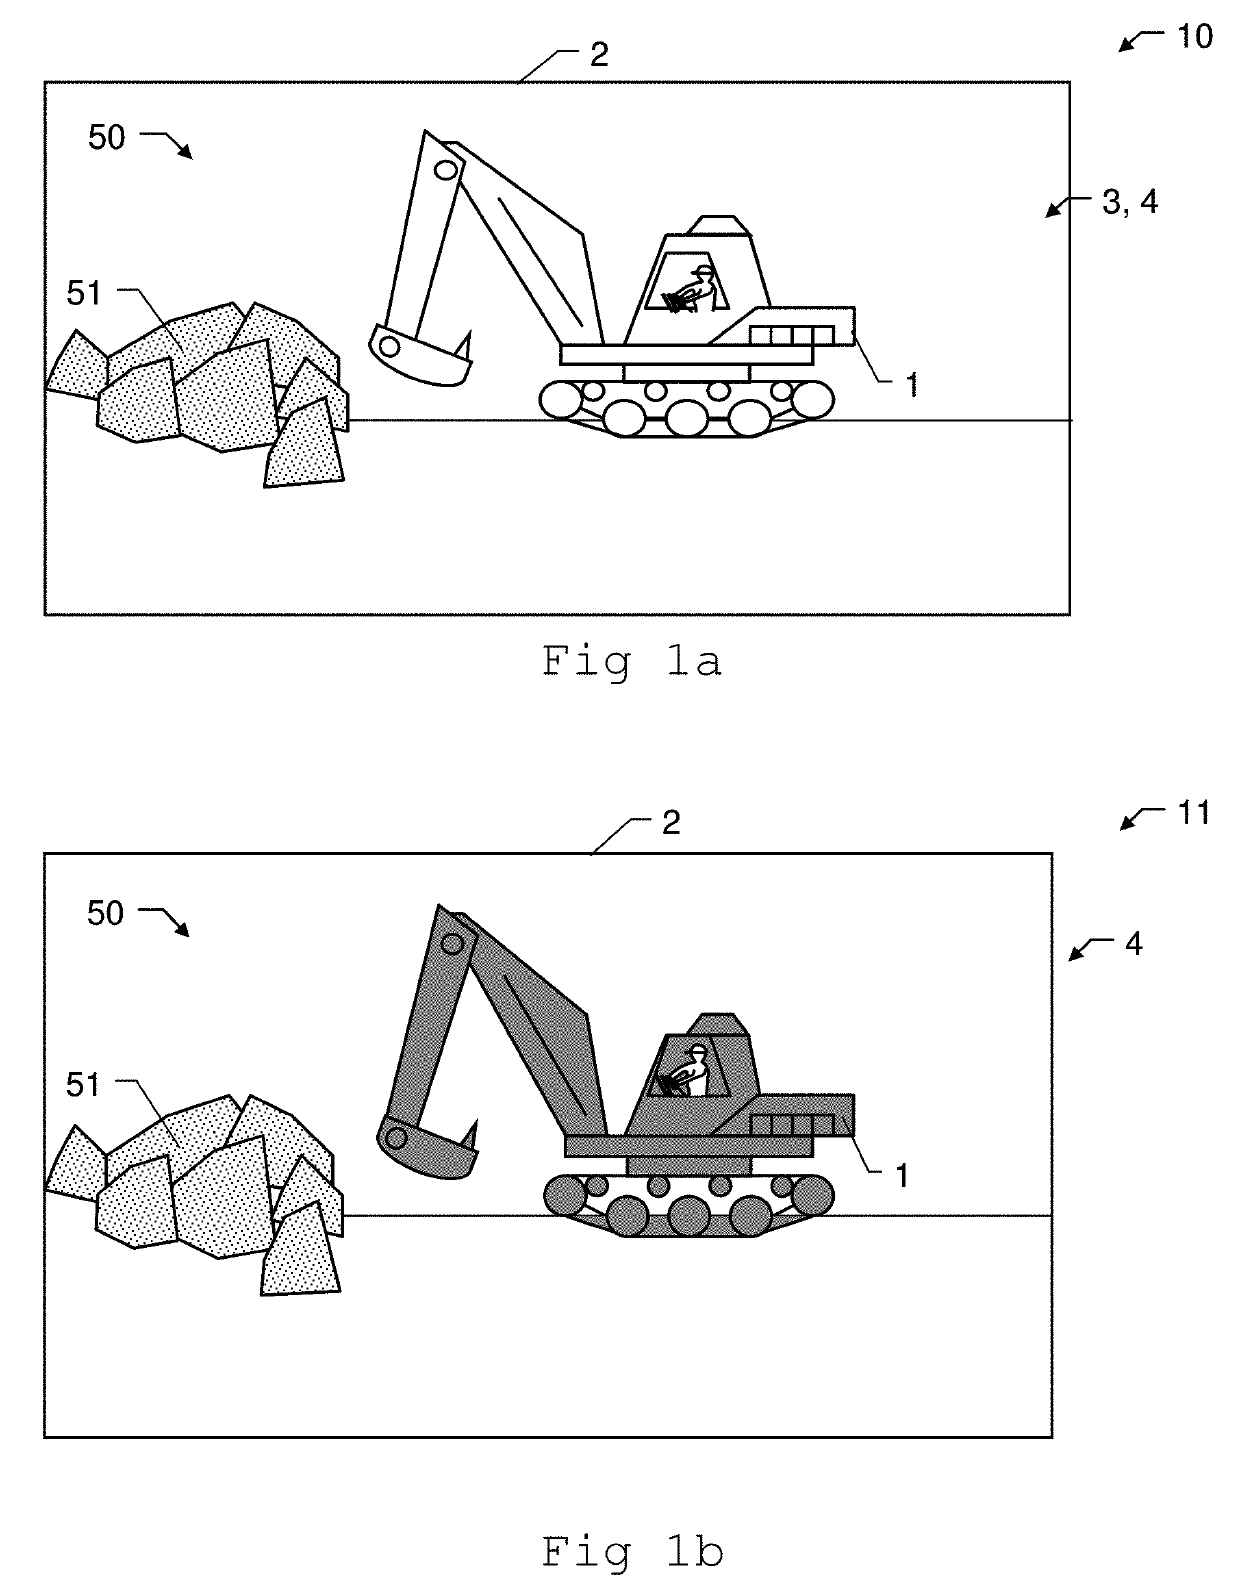 Method and device for augmenting a person's view of a mining vehicle on a mining worksite in real-time